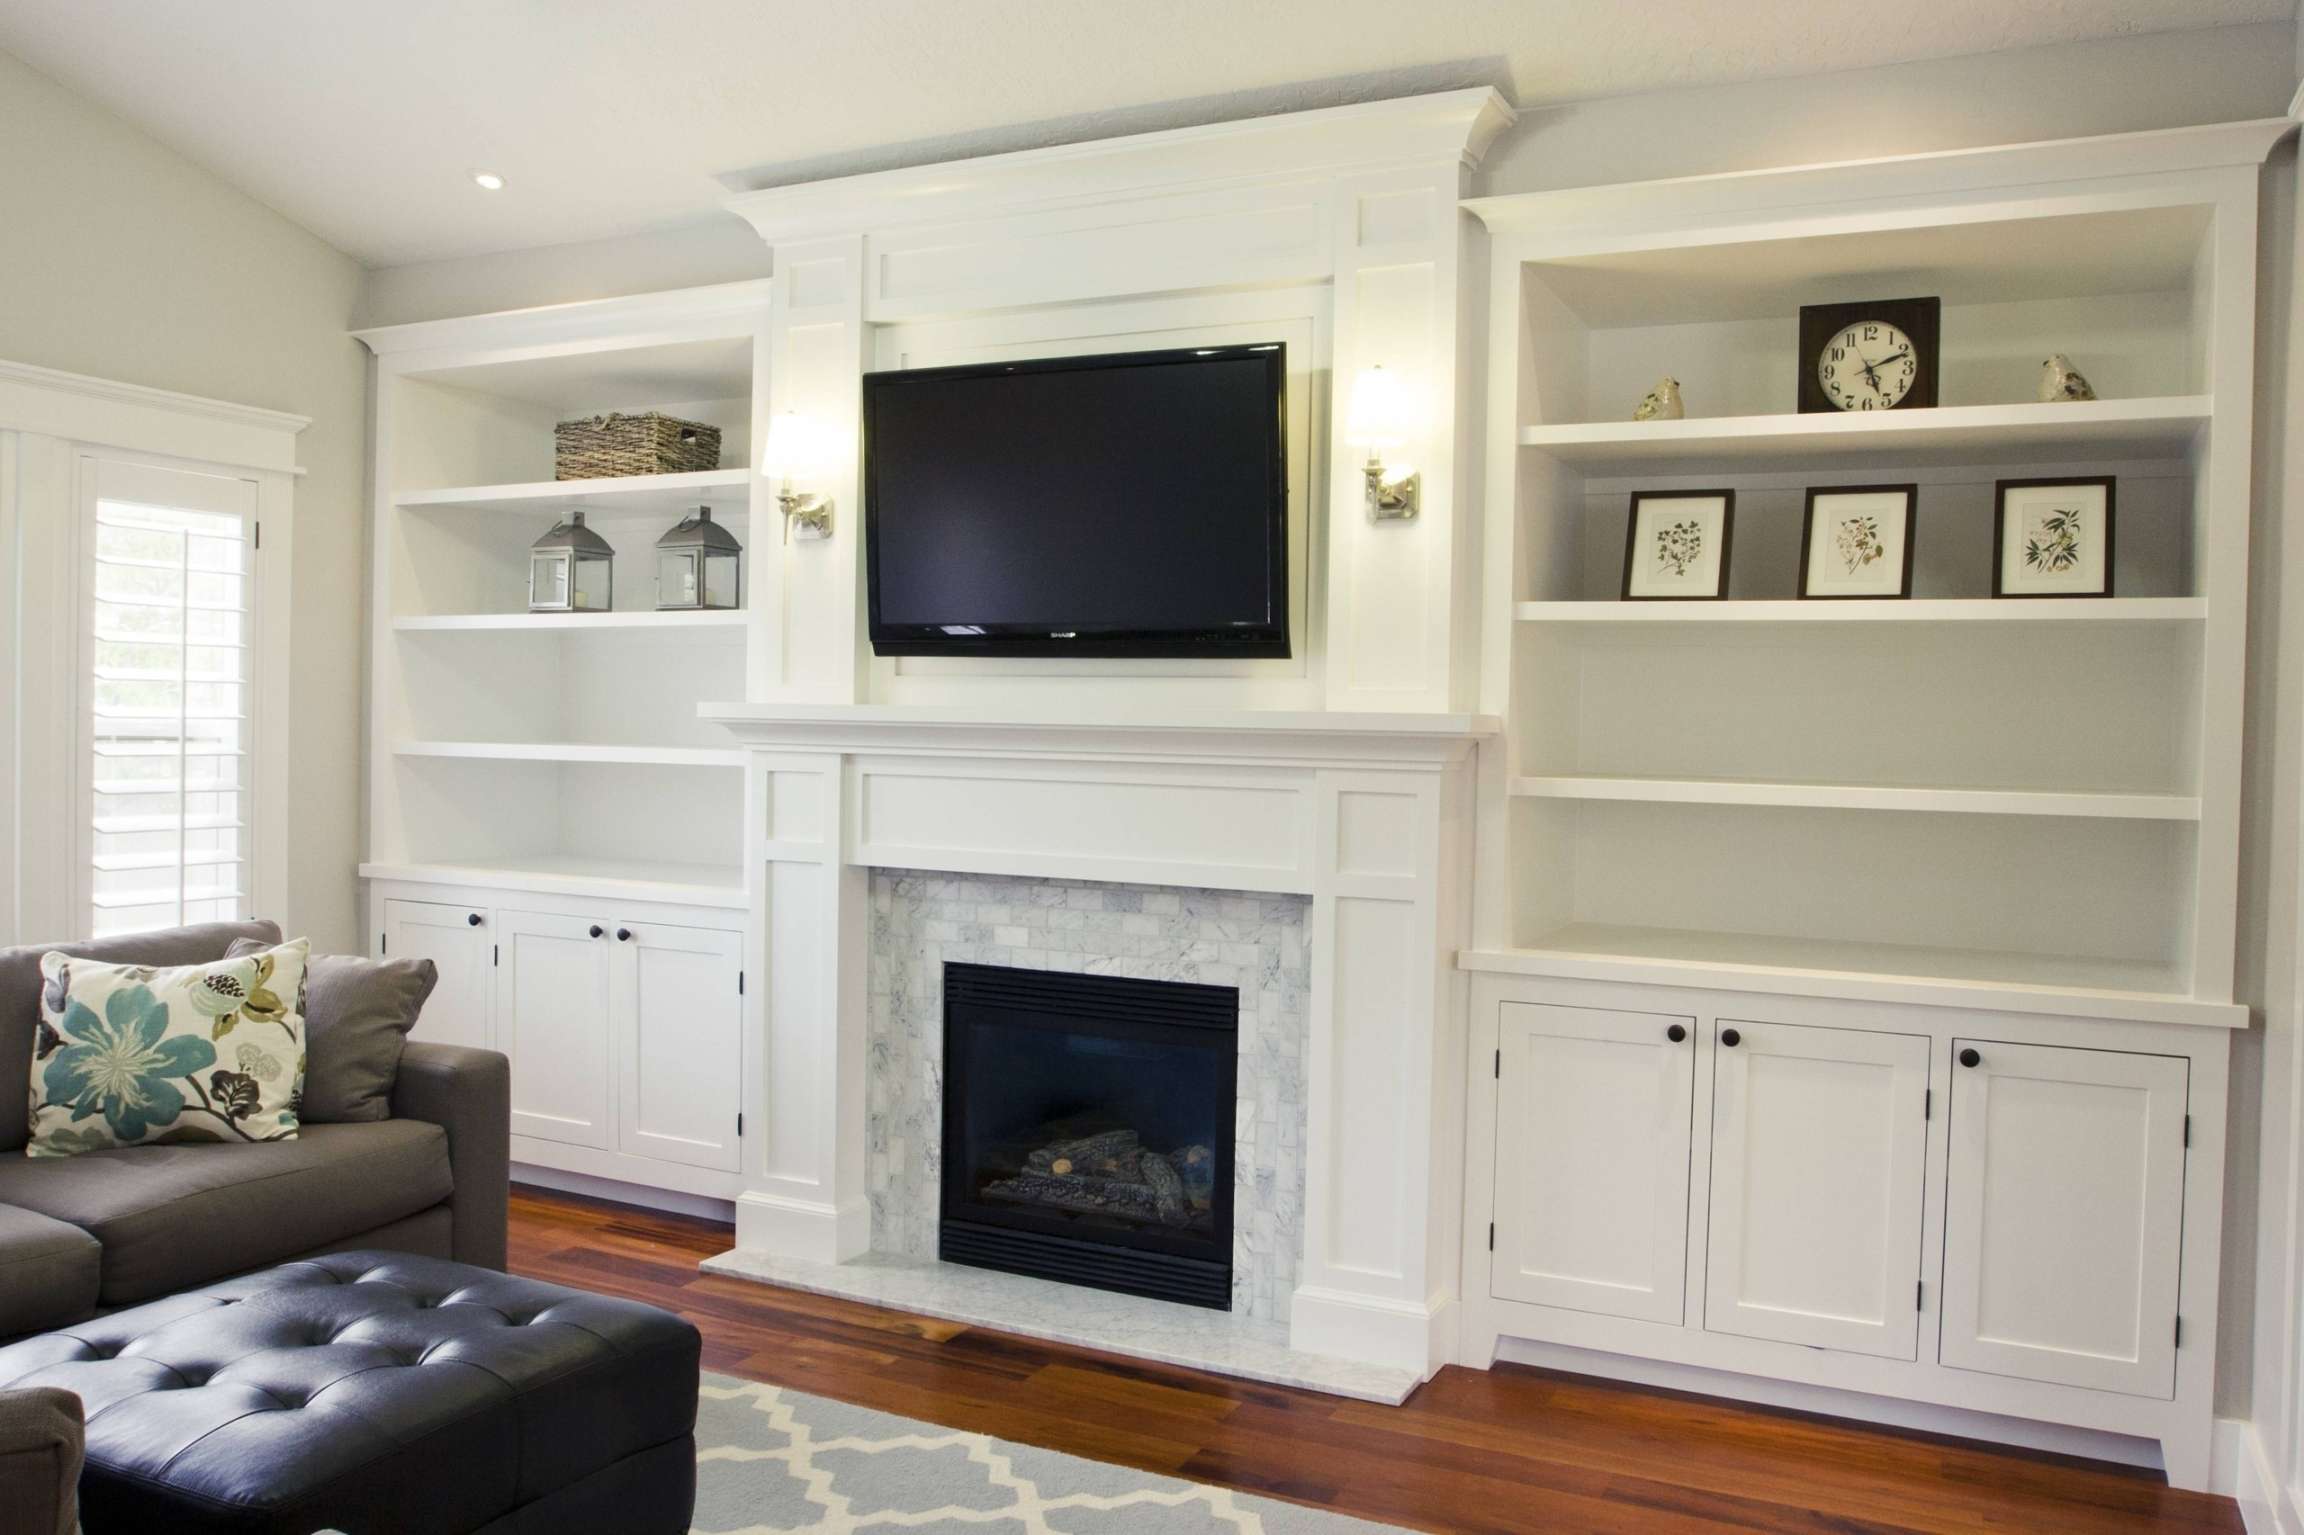 Electric Fireplaces With Bookshelves - Foter